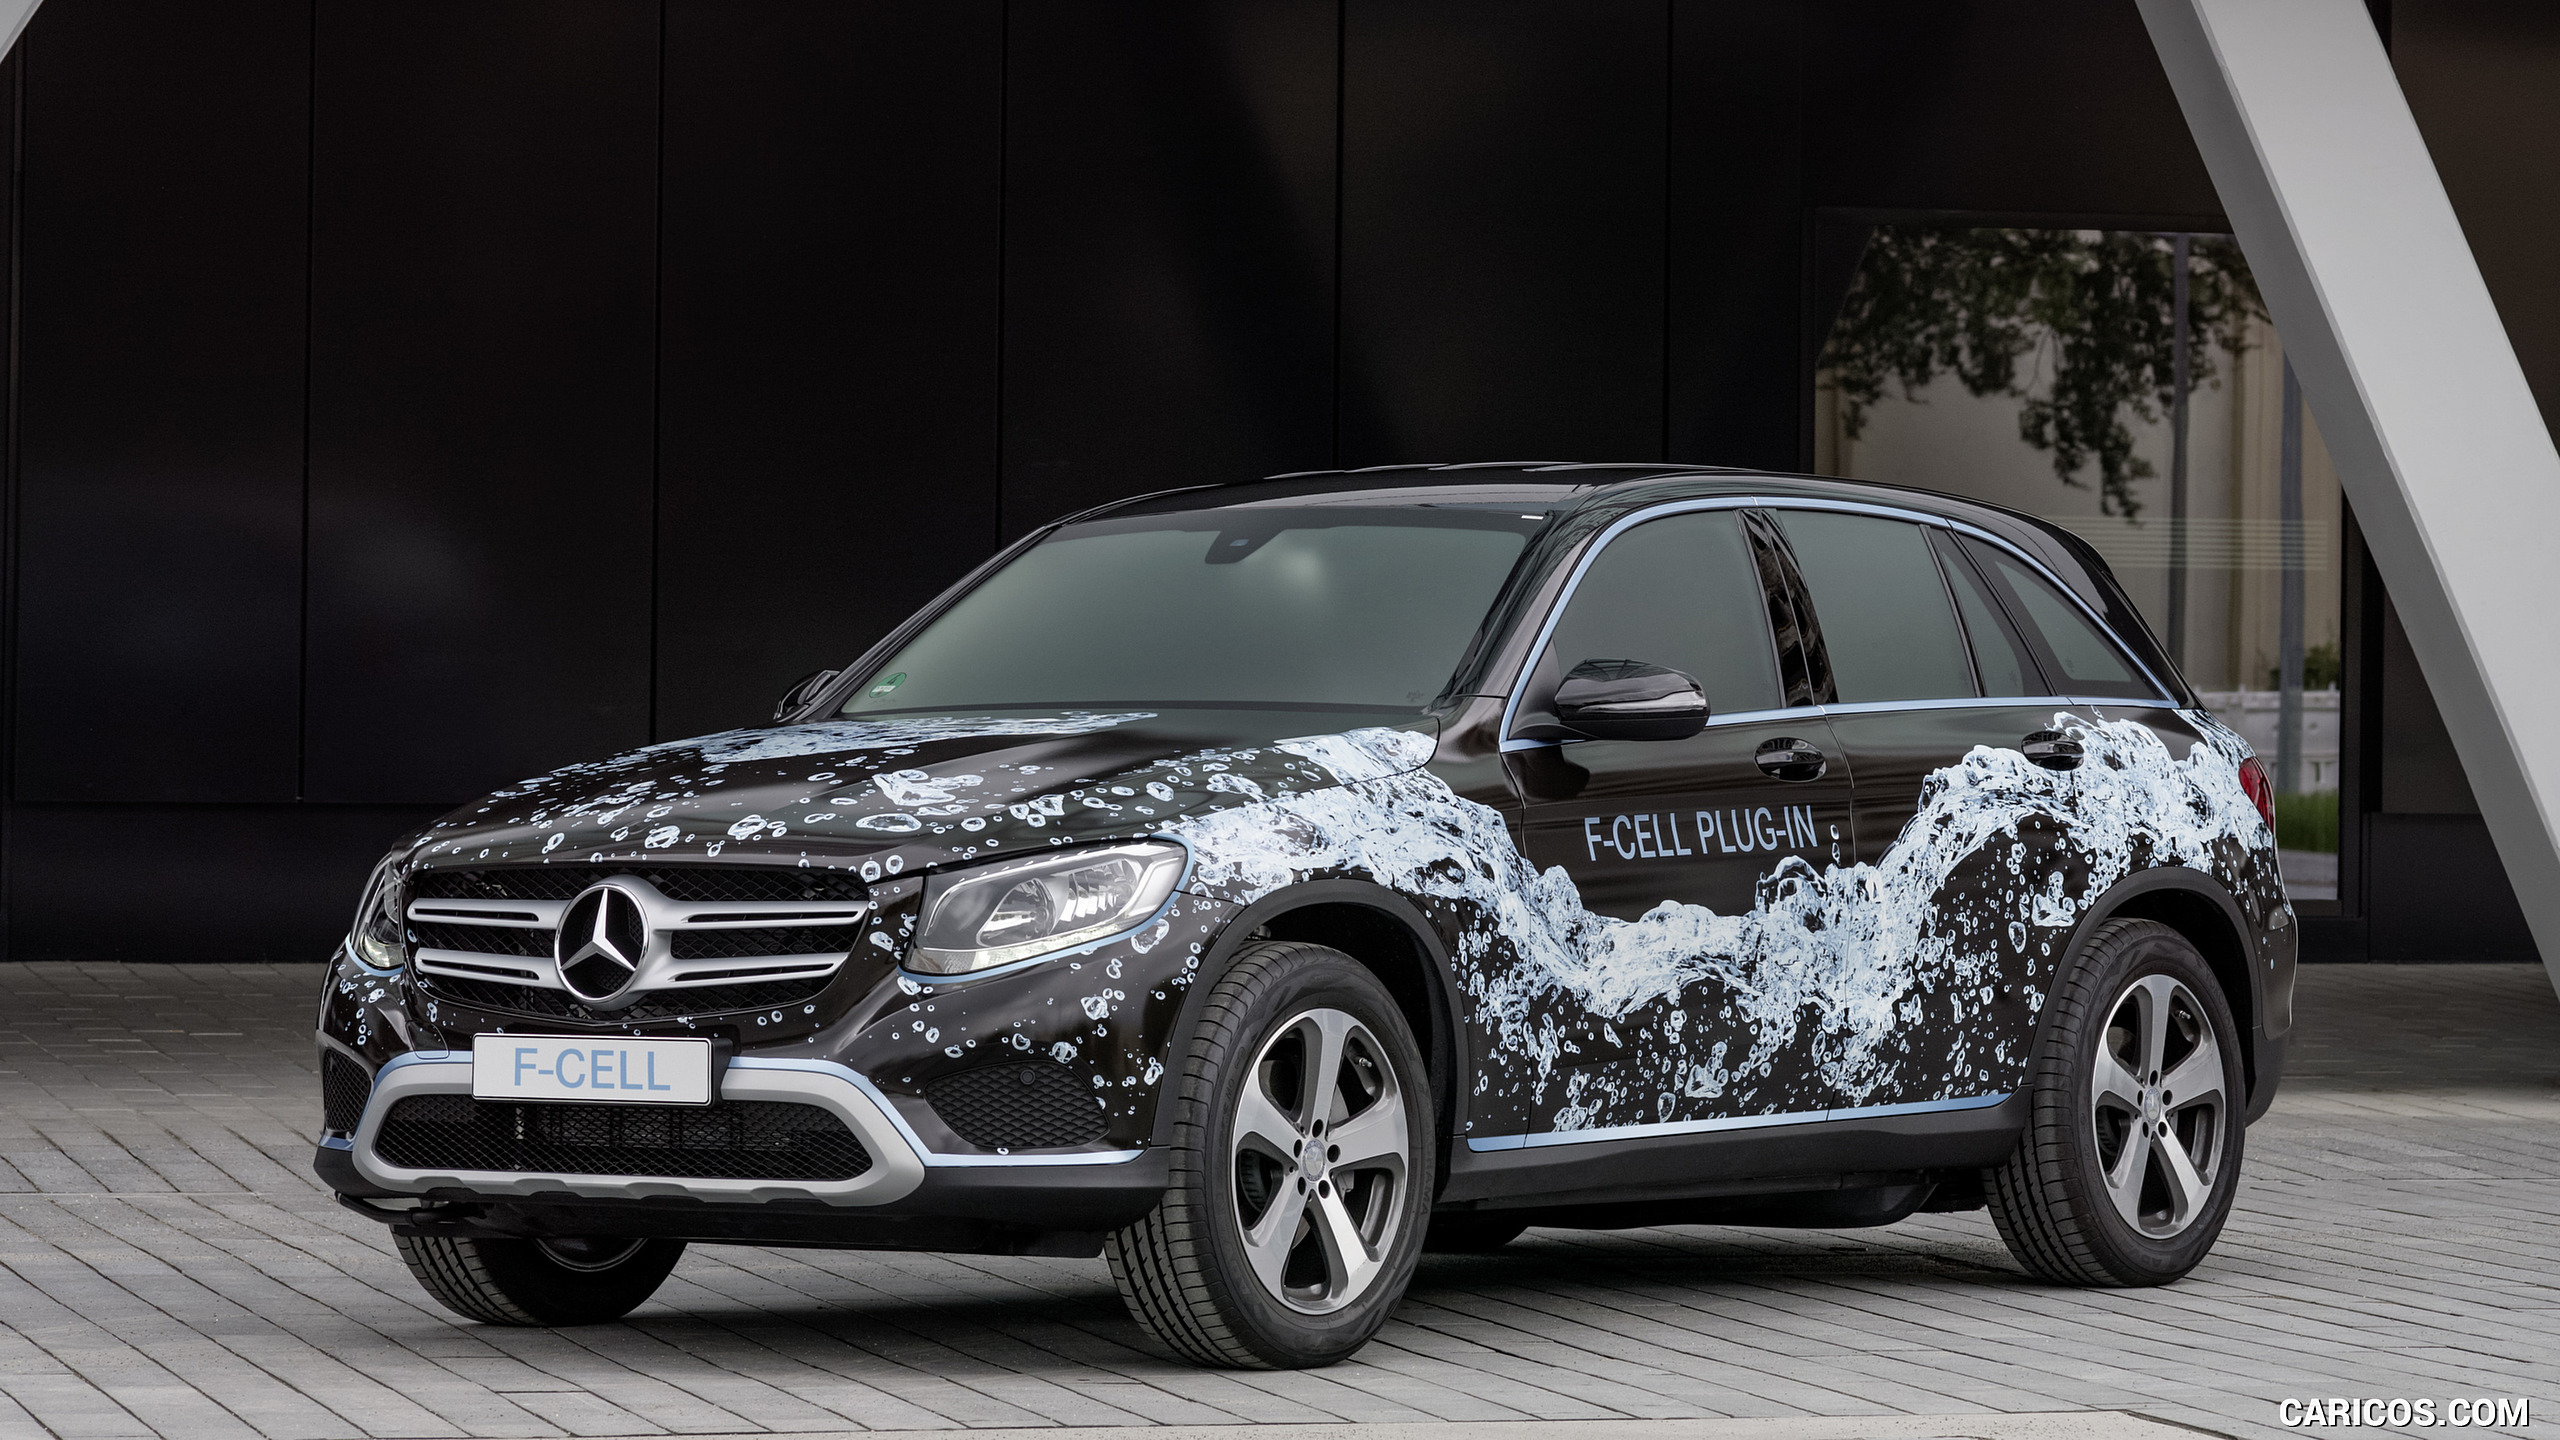 2016 Mercedes-Benz GLC F-Cell Plug-In Concept - Front Three-Quarter, #8 of 20